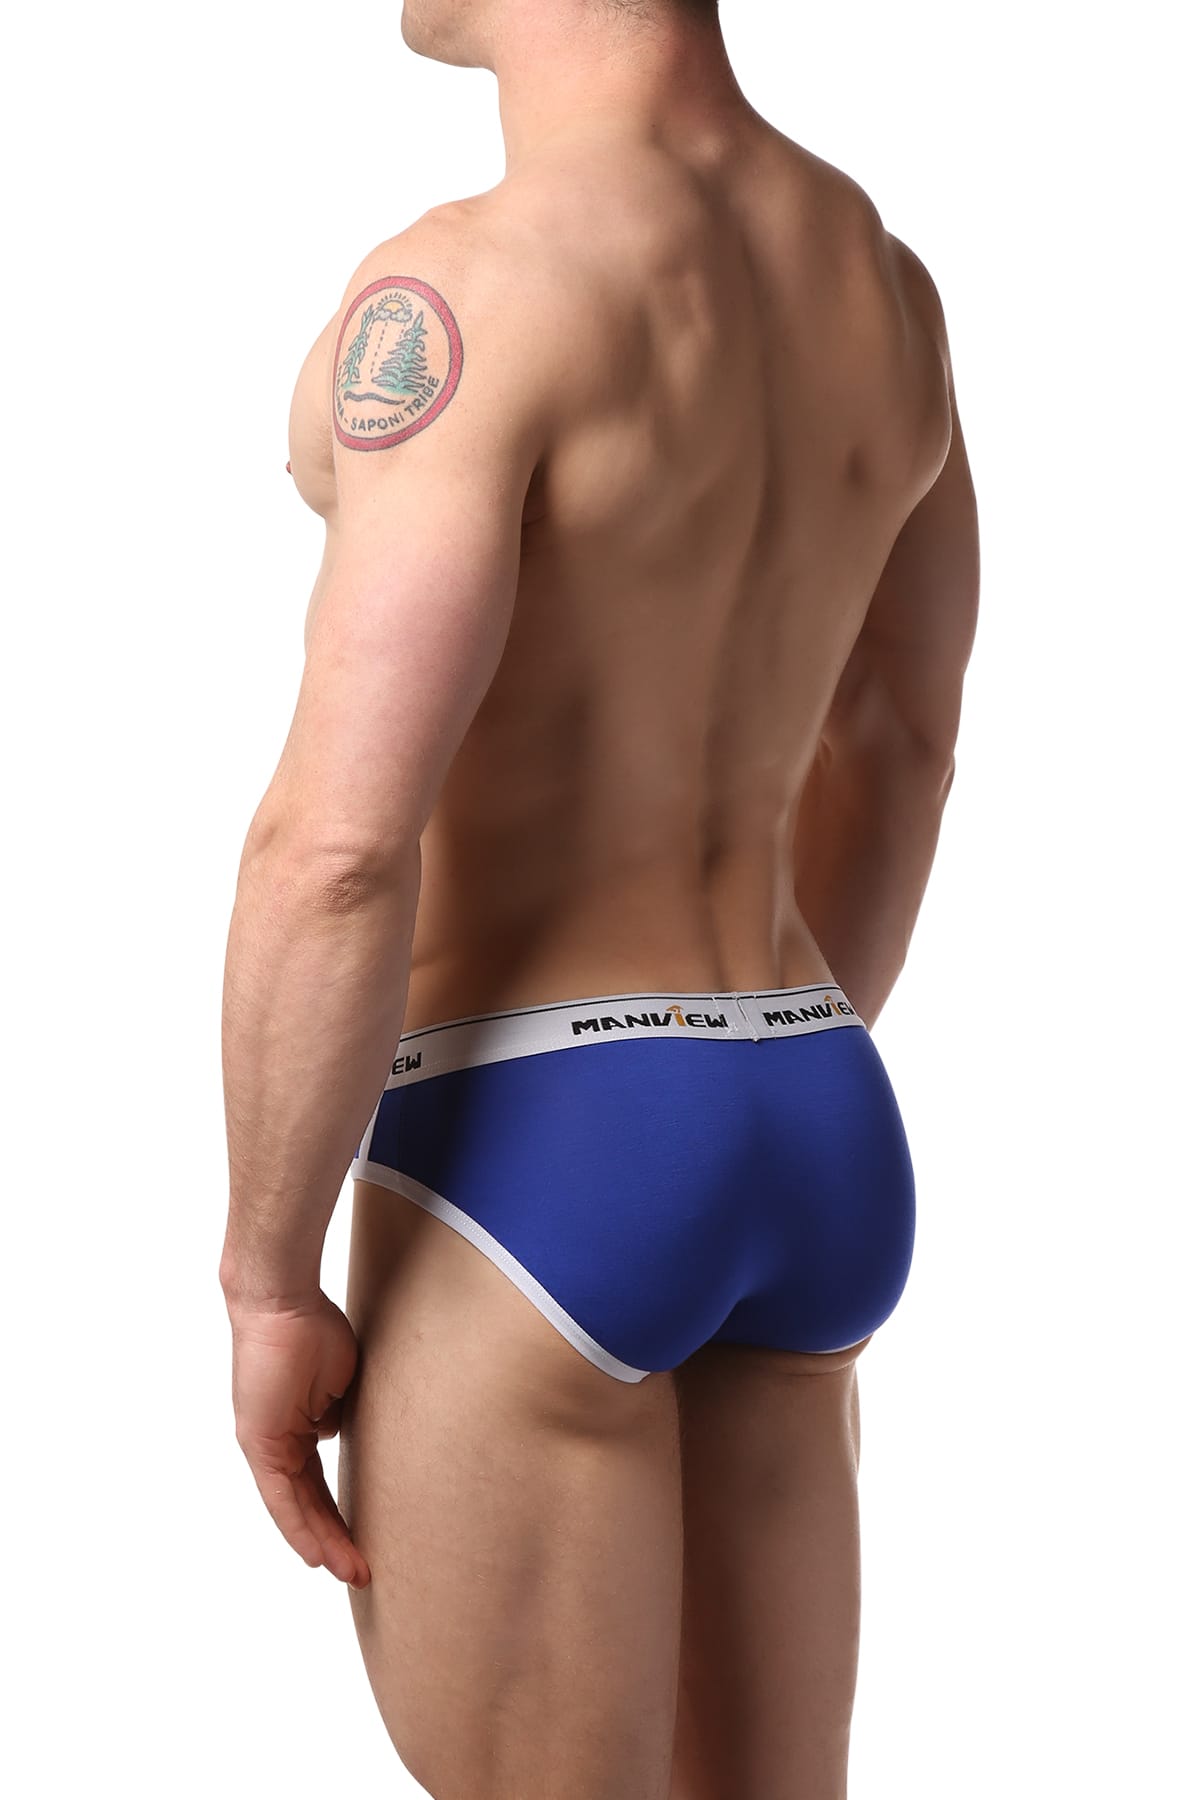 Manview Royal-Blue Racer Brief